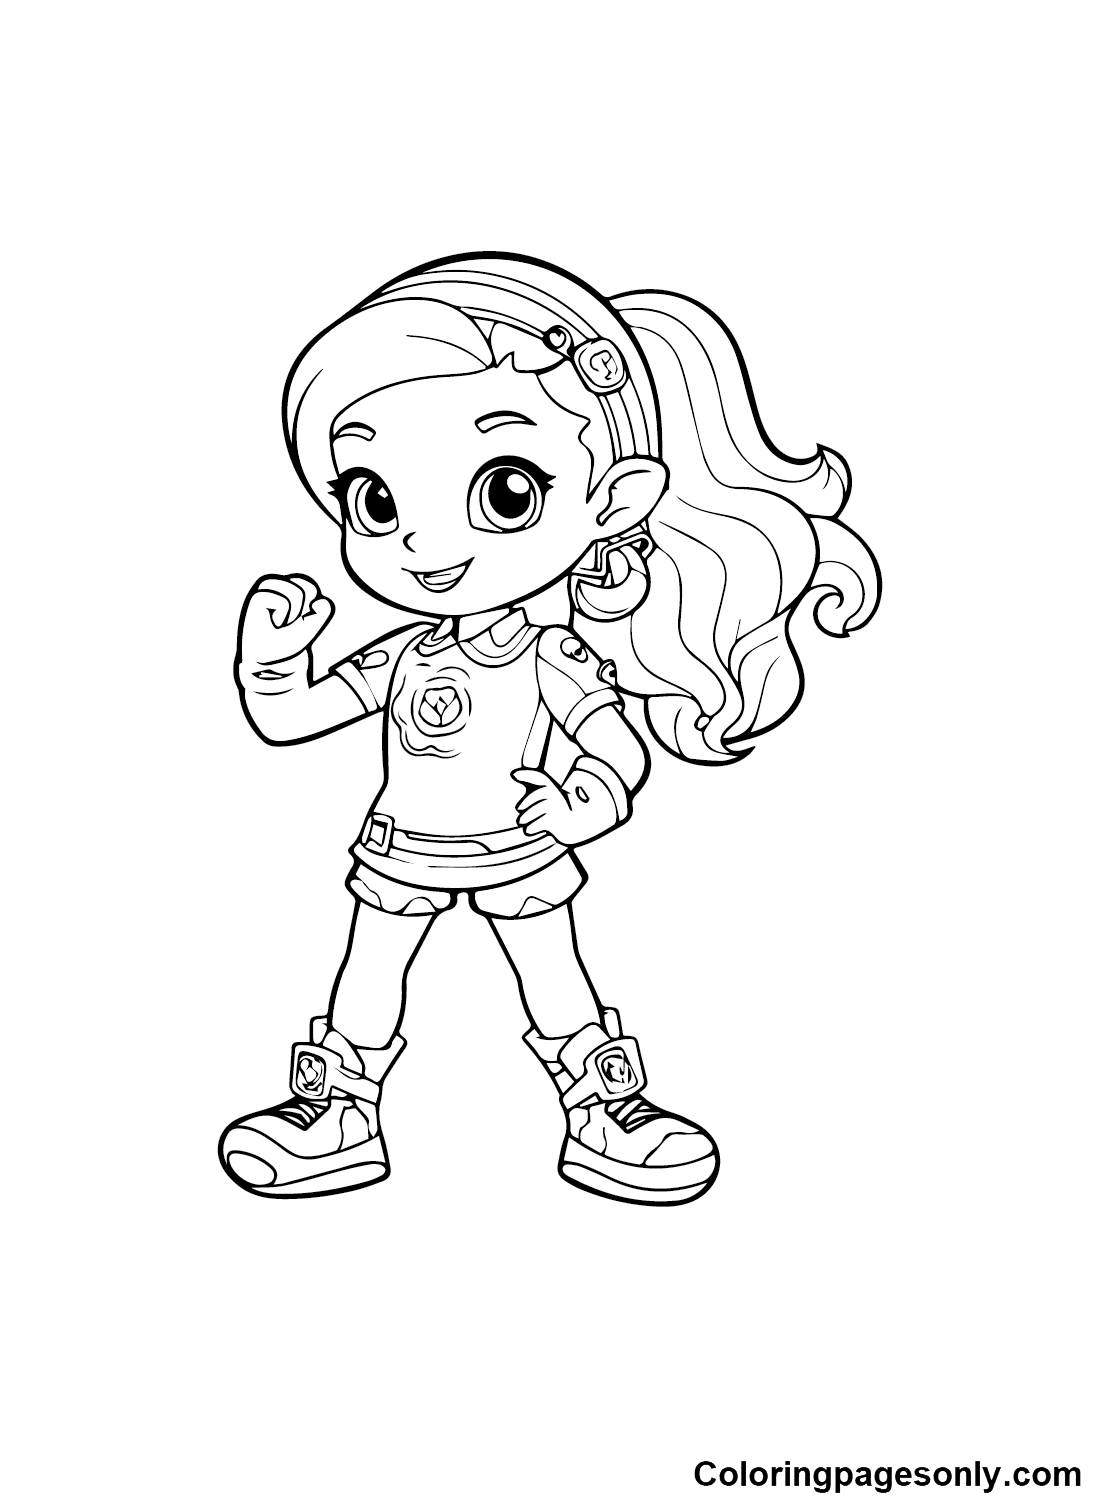 Lovely Rainbow Rangers Coloring Page